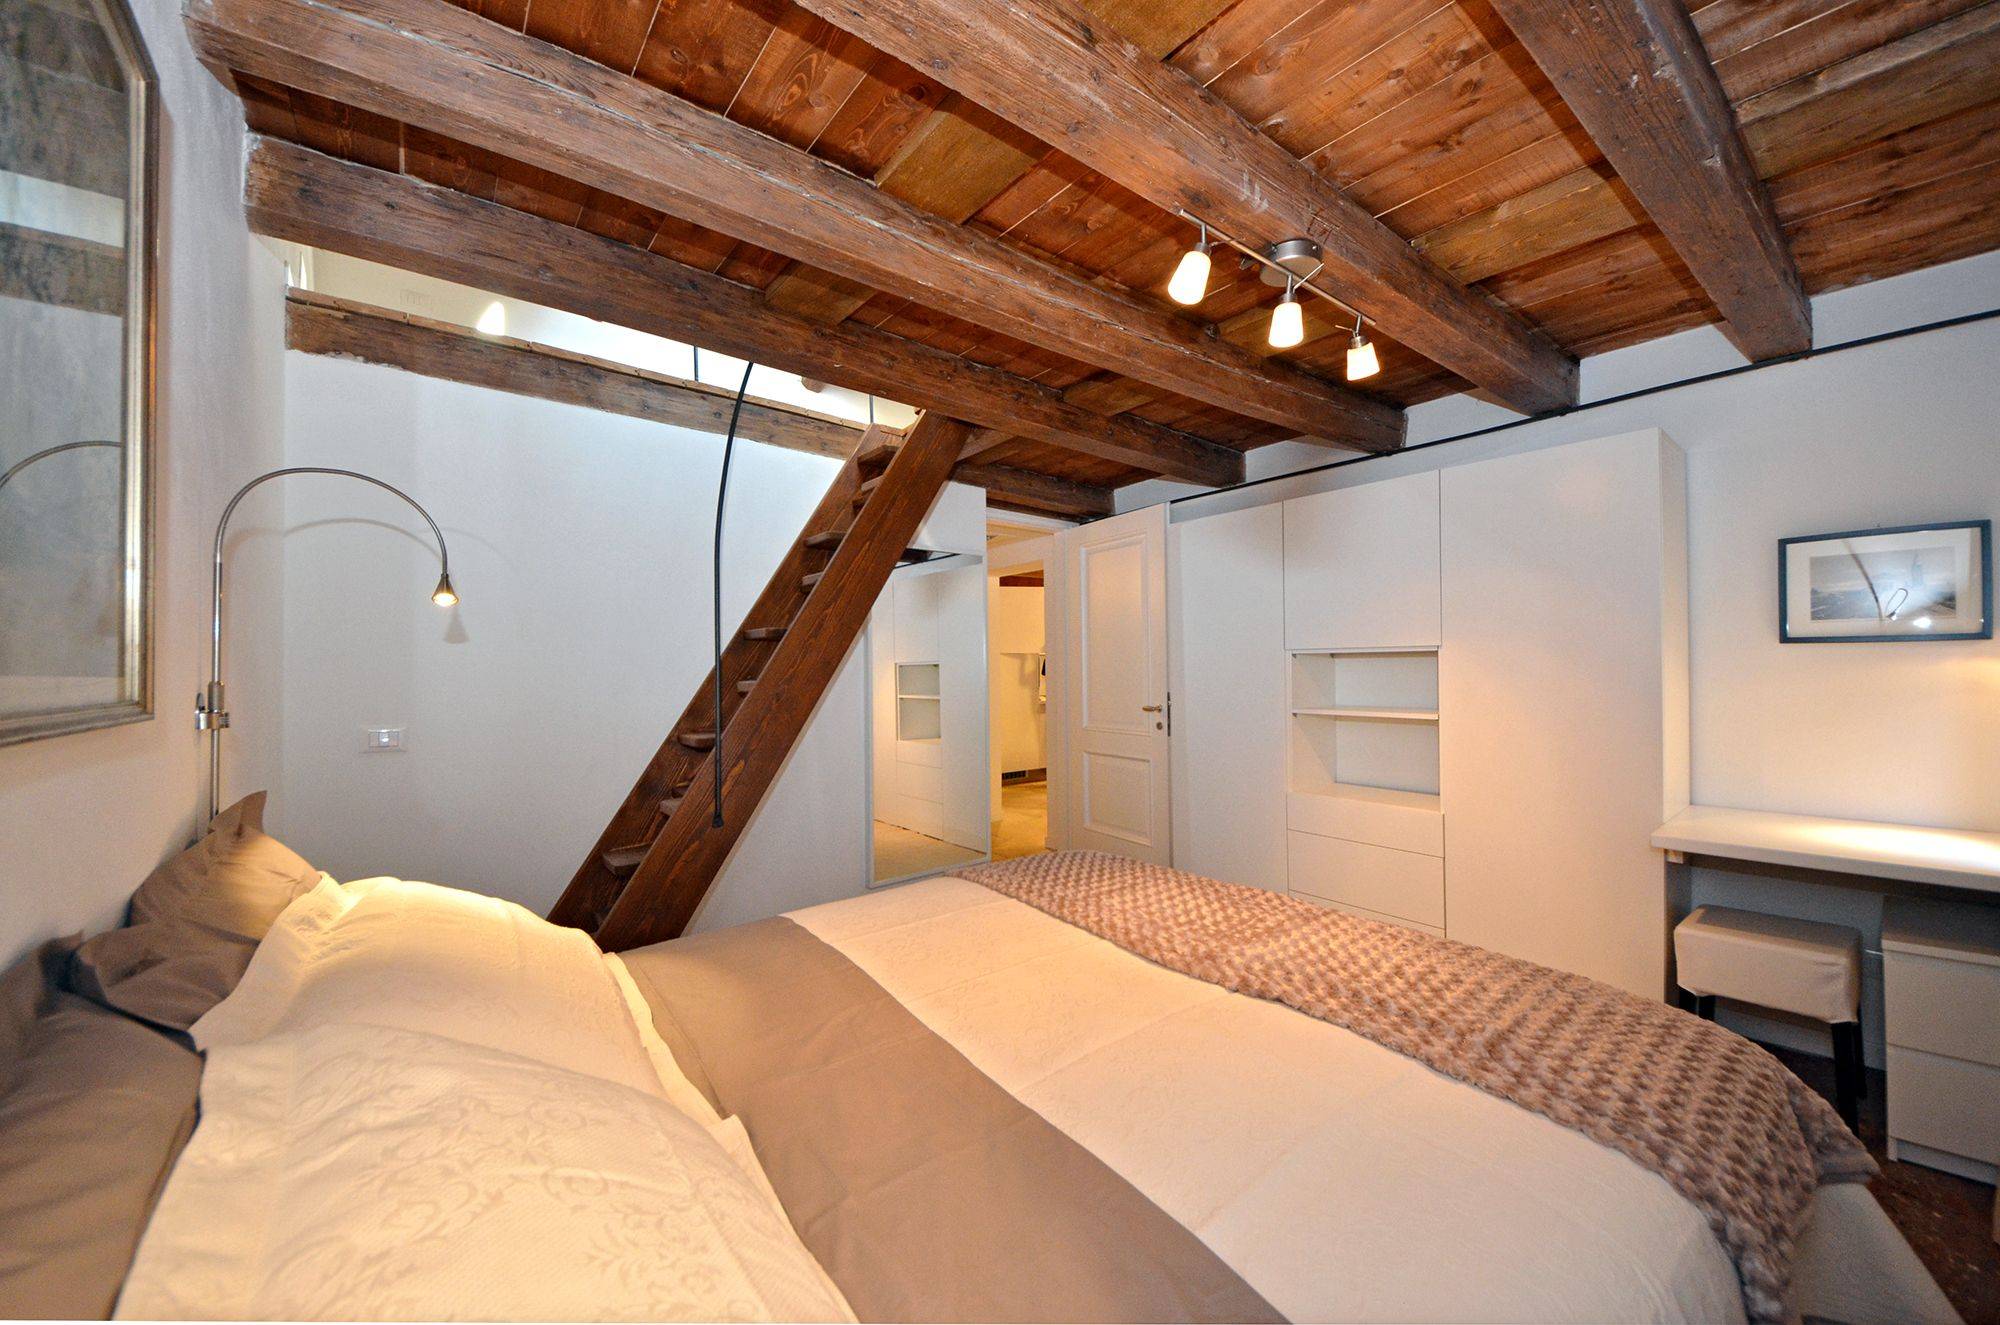 the double bedroom has plenty of wardrobe space and a staircase to the attic